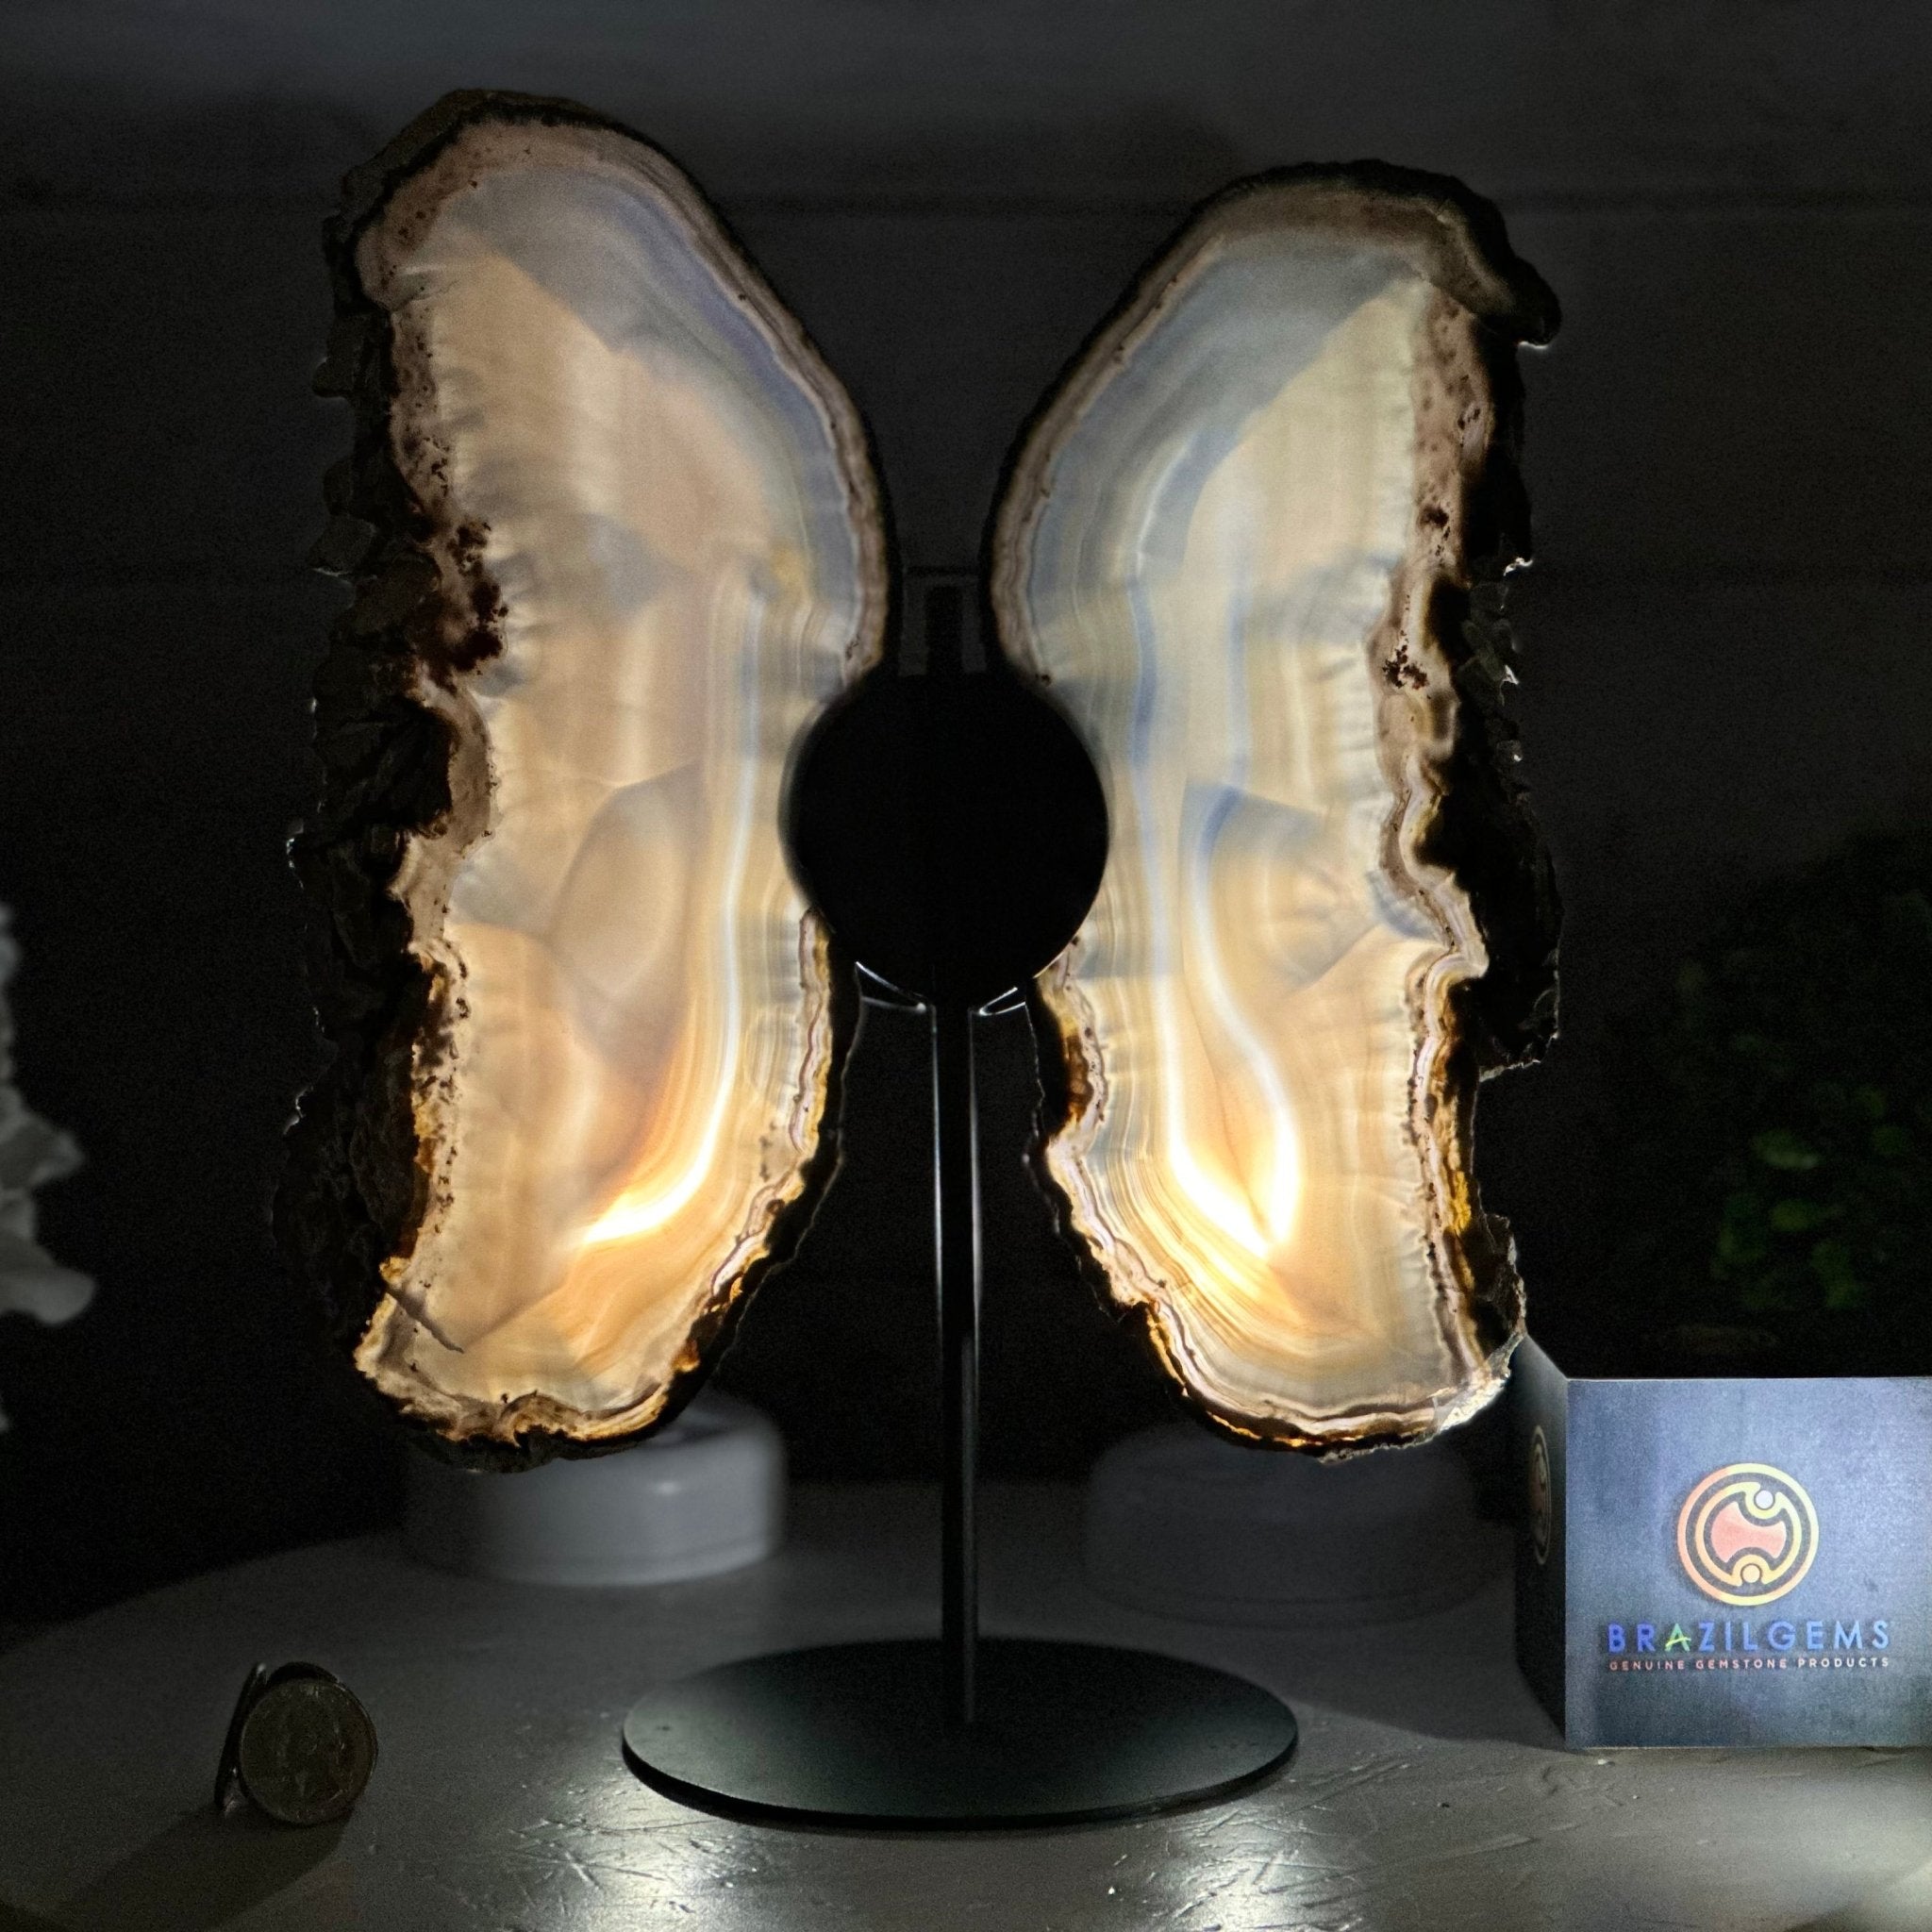 Natural Brazilian Agate "Butterfly Wings", 11.5" Tall #5050NA-129 - Brazil GemsBrazil GemsNatural Brazilian Agate "Butterfly Wings", 11.5" Tall #5050NA-129Agate Butterfly Wings5050NA-129